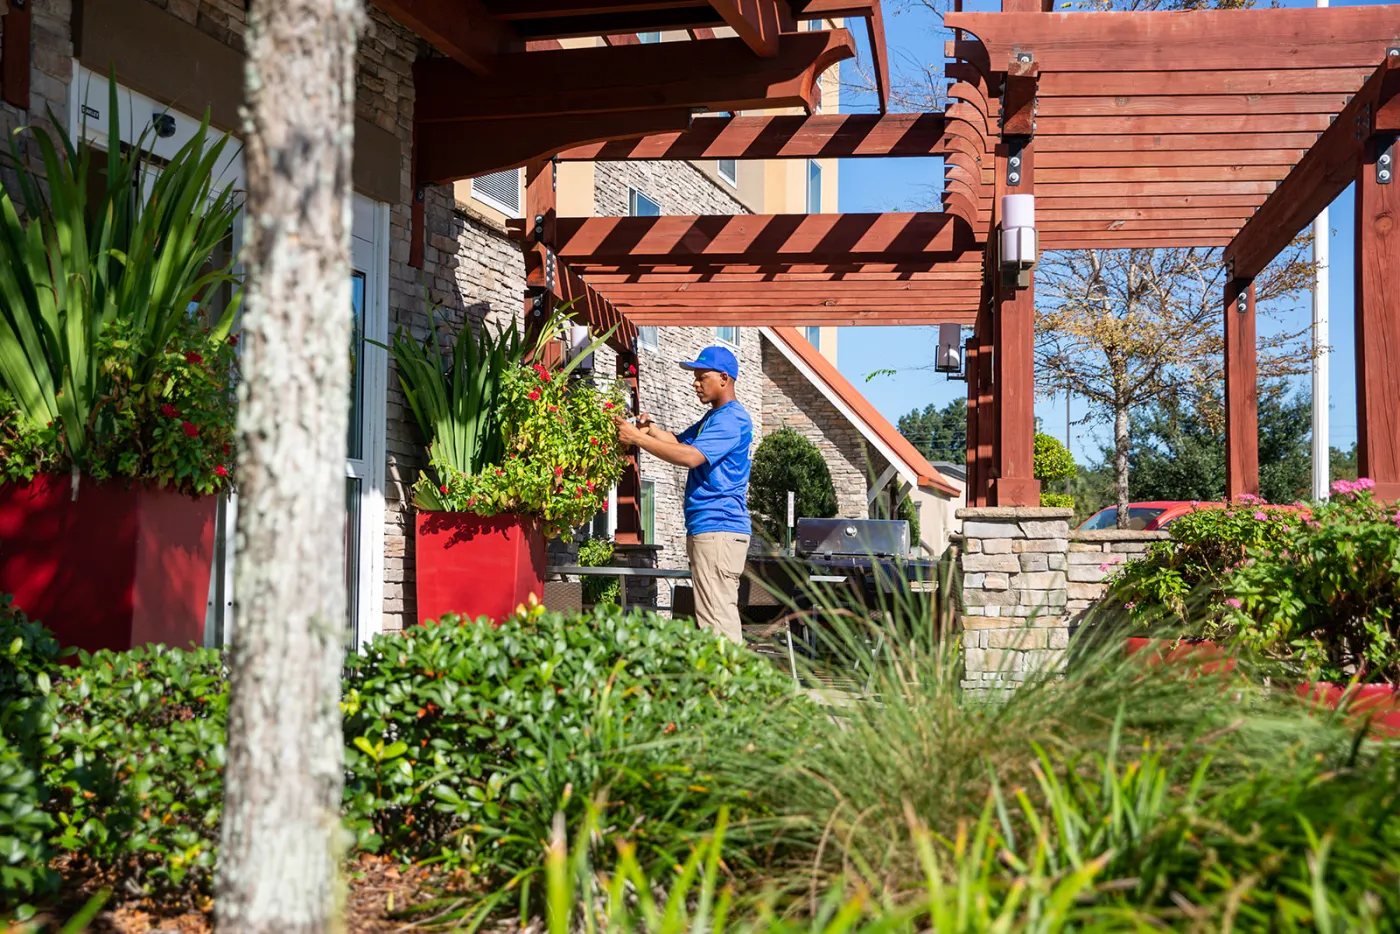  Your Perfect Outdoor Oasis with Landscape Design and ‘Lawn Services Near Me’ in St. Augustine, FL